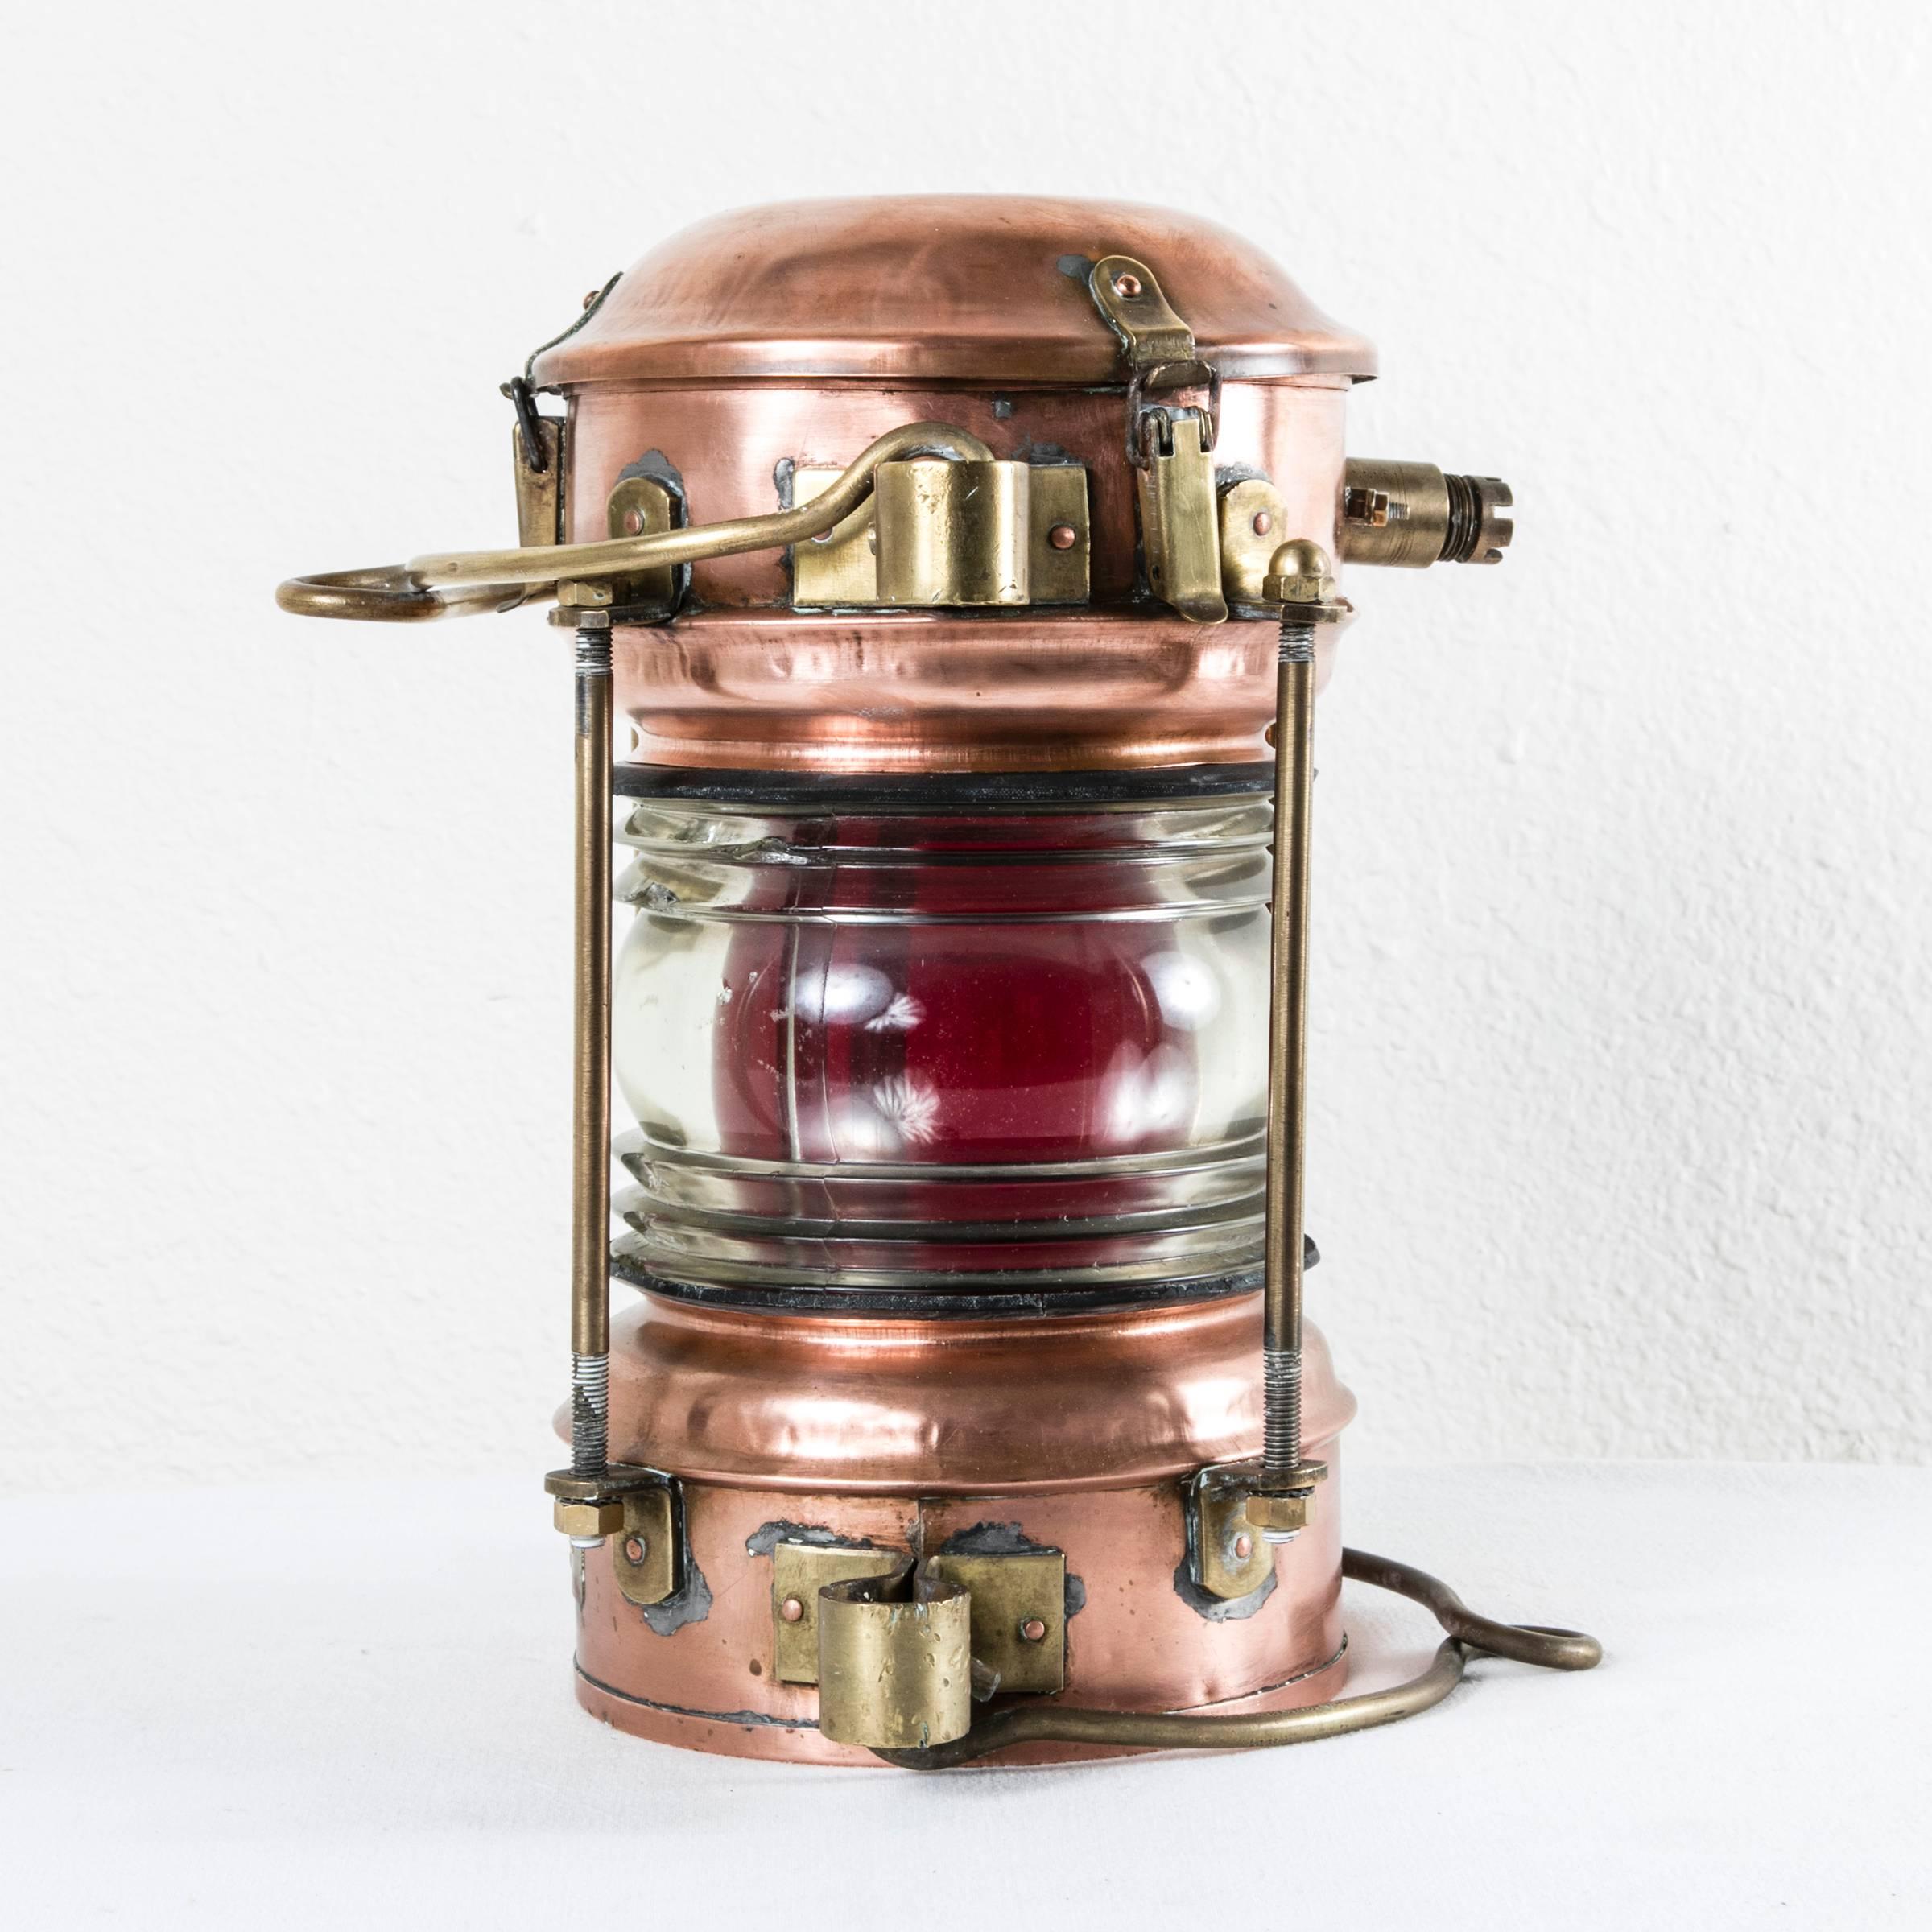 This large classic 19th century copper and brass nautical lantern features the label of its maker in St. Ouen, near Paris. Used on a river boat, its beautifully aged copper and brass shine brightly and its original red glass, for the starboard side,